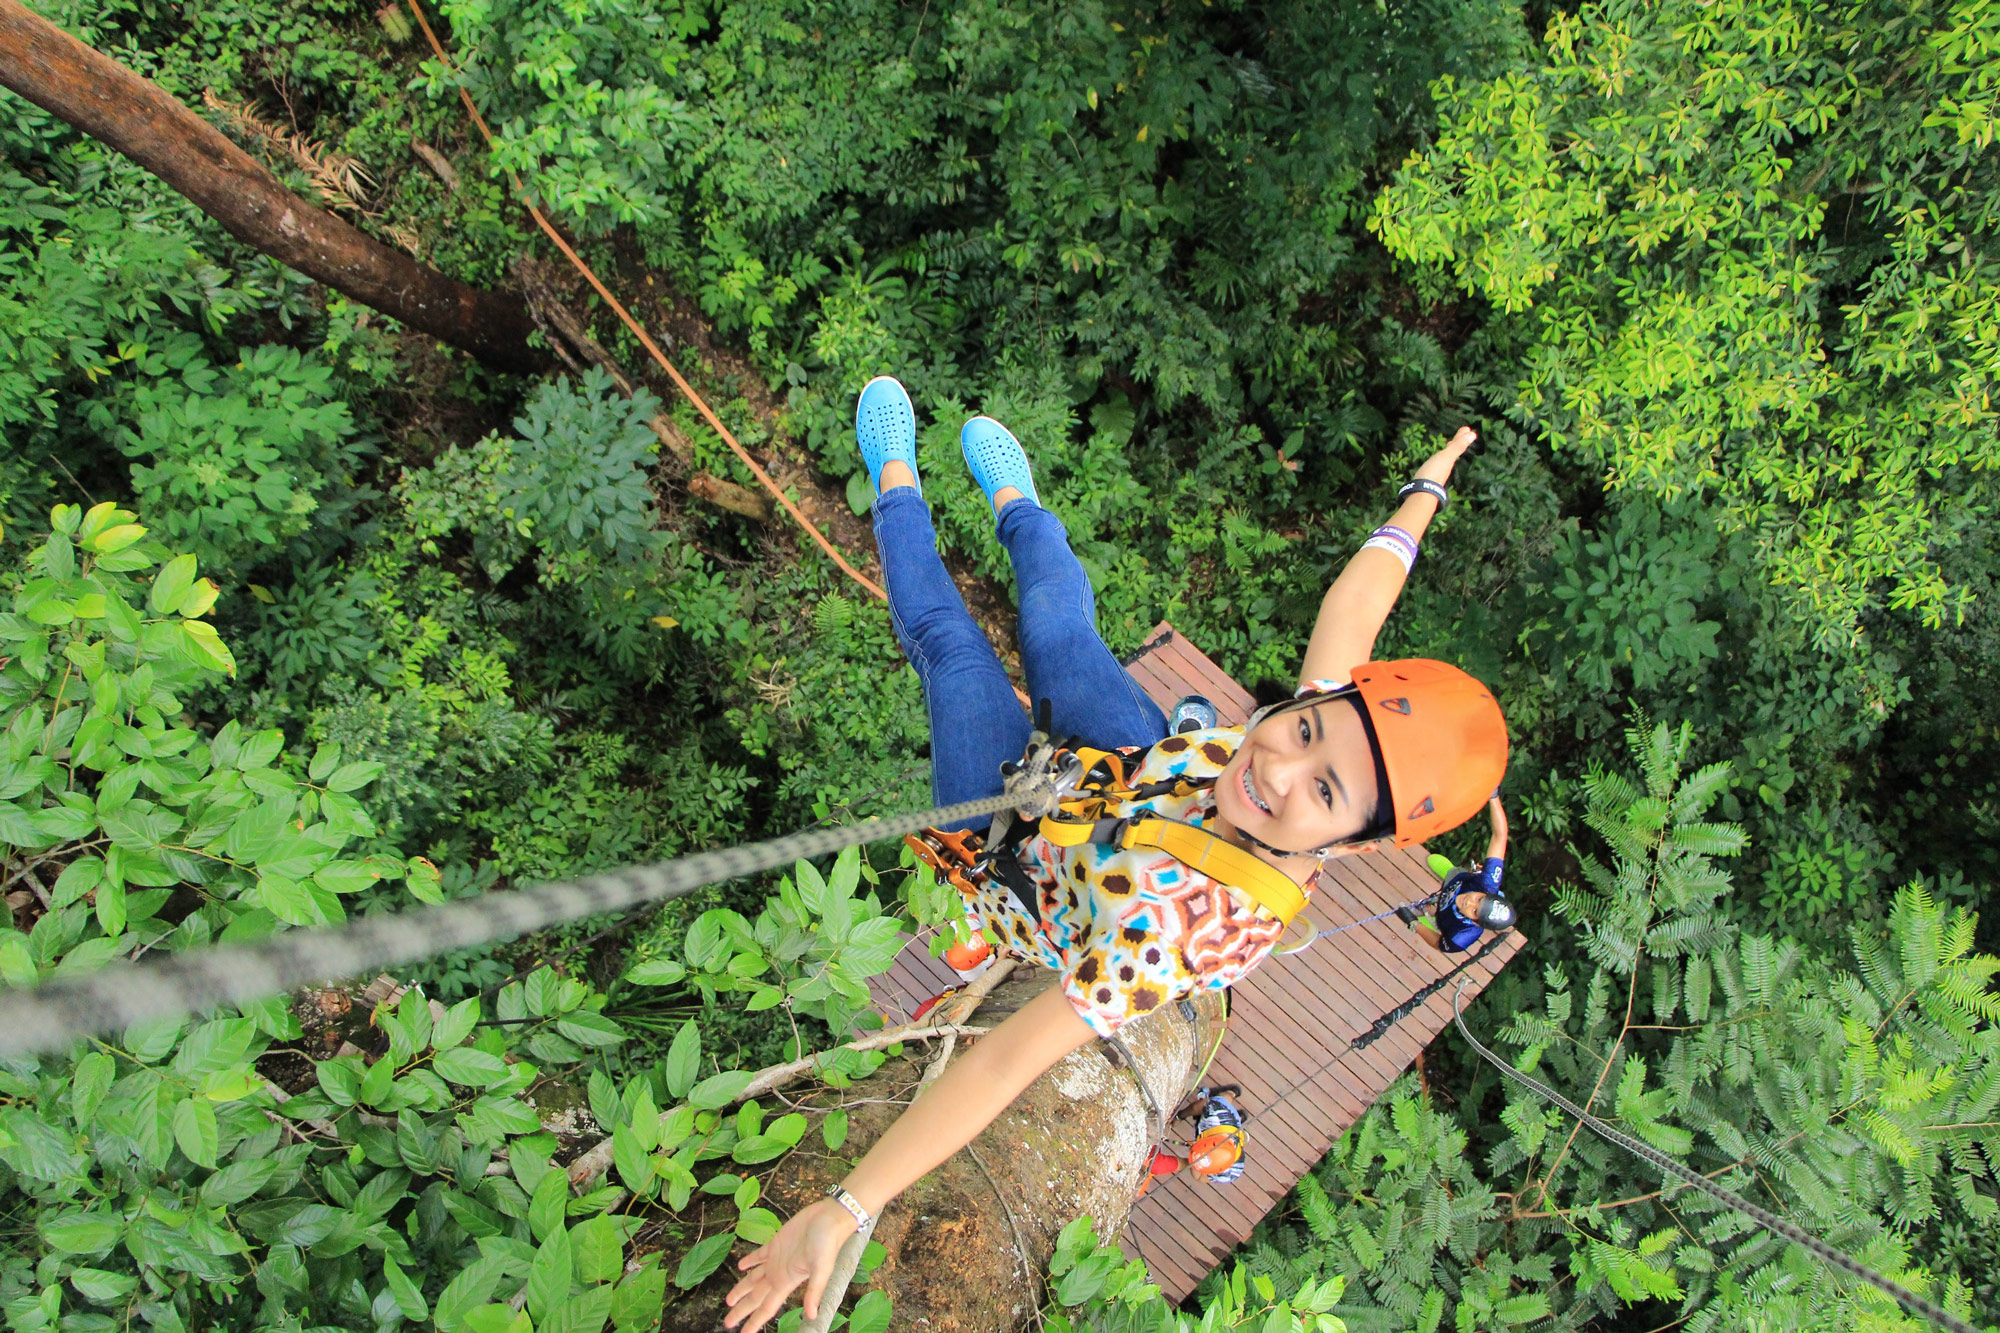 Treetop Flyers: Treetop Flyers is three ziplines, two waterfalls, and one ultimate adventure. Get your adrenaline going with a zip over the falls or a 100’ drop from the air. For adrenaline […]